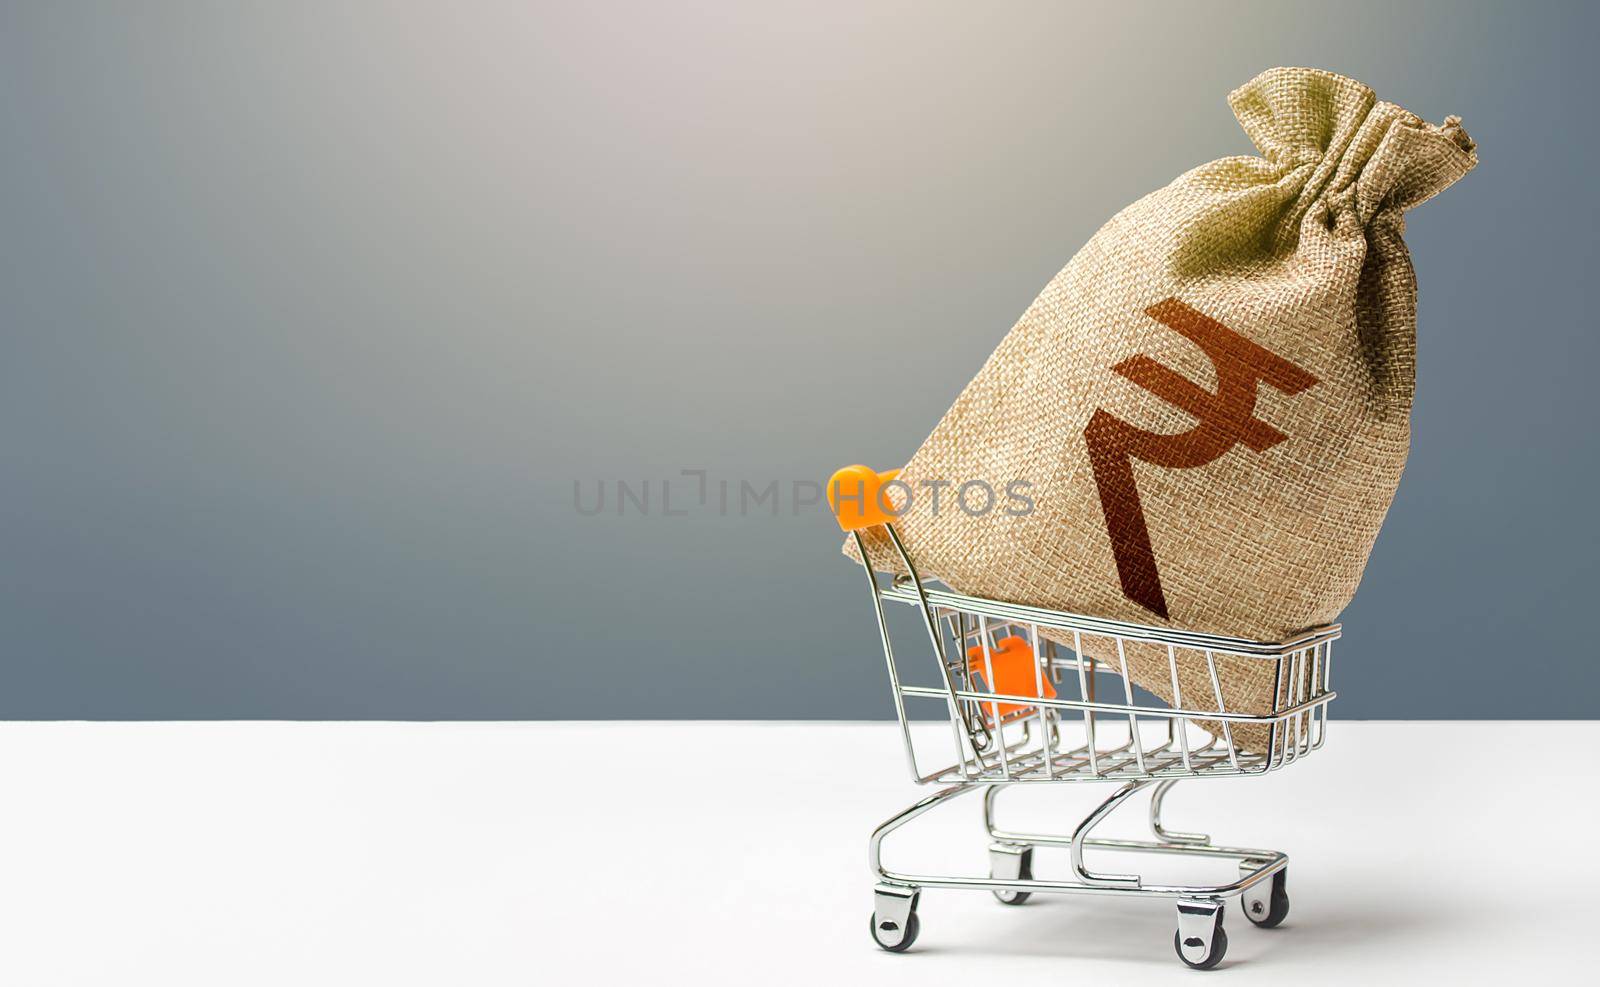 Indian rupee money bag in a shopping cart. Profits and super profits. Minimum living wage. Consumer basket. Business and trade concept. Public budgeting. Economic bubbles. Loans, microloans.